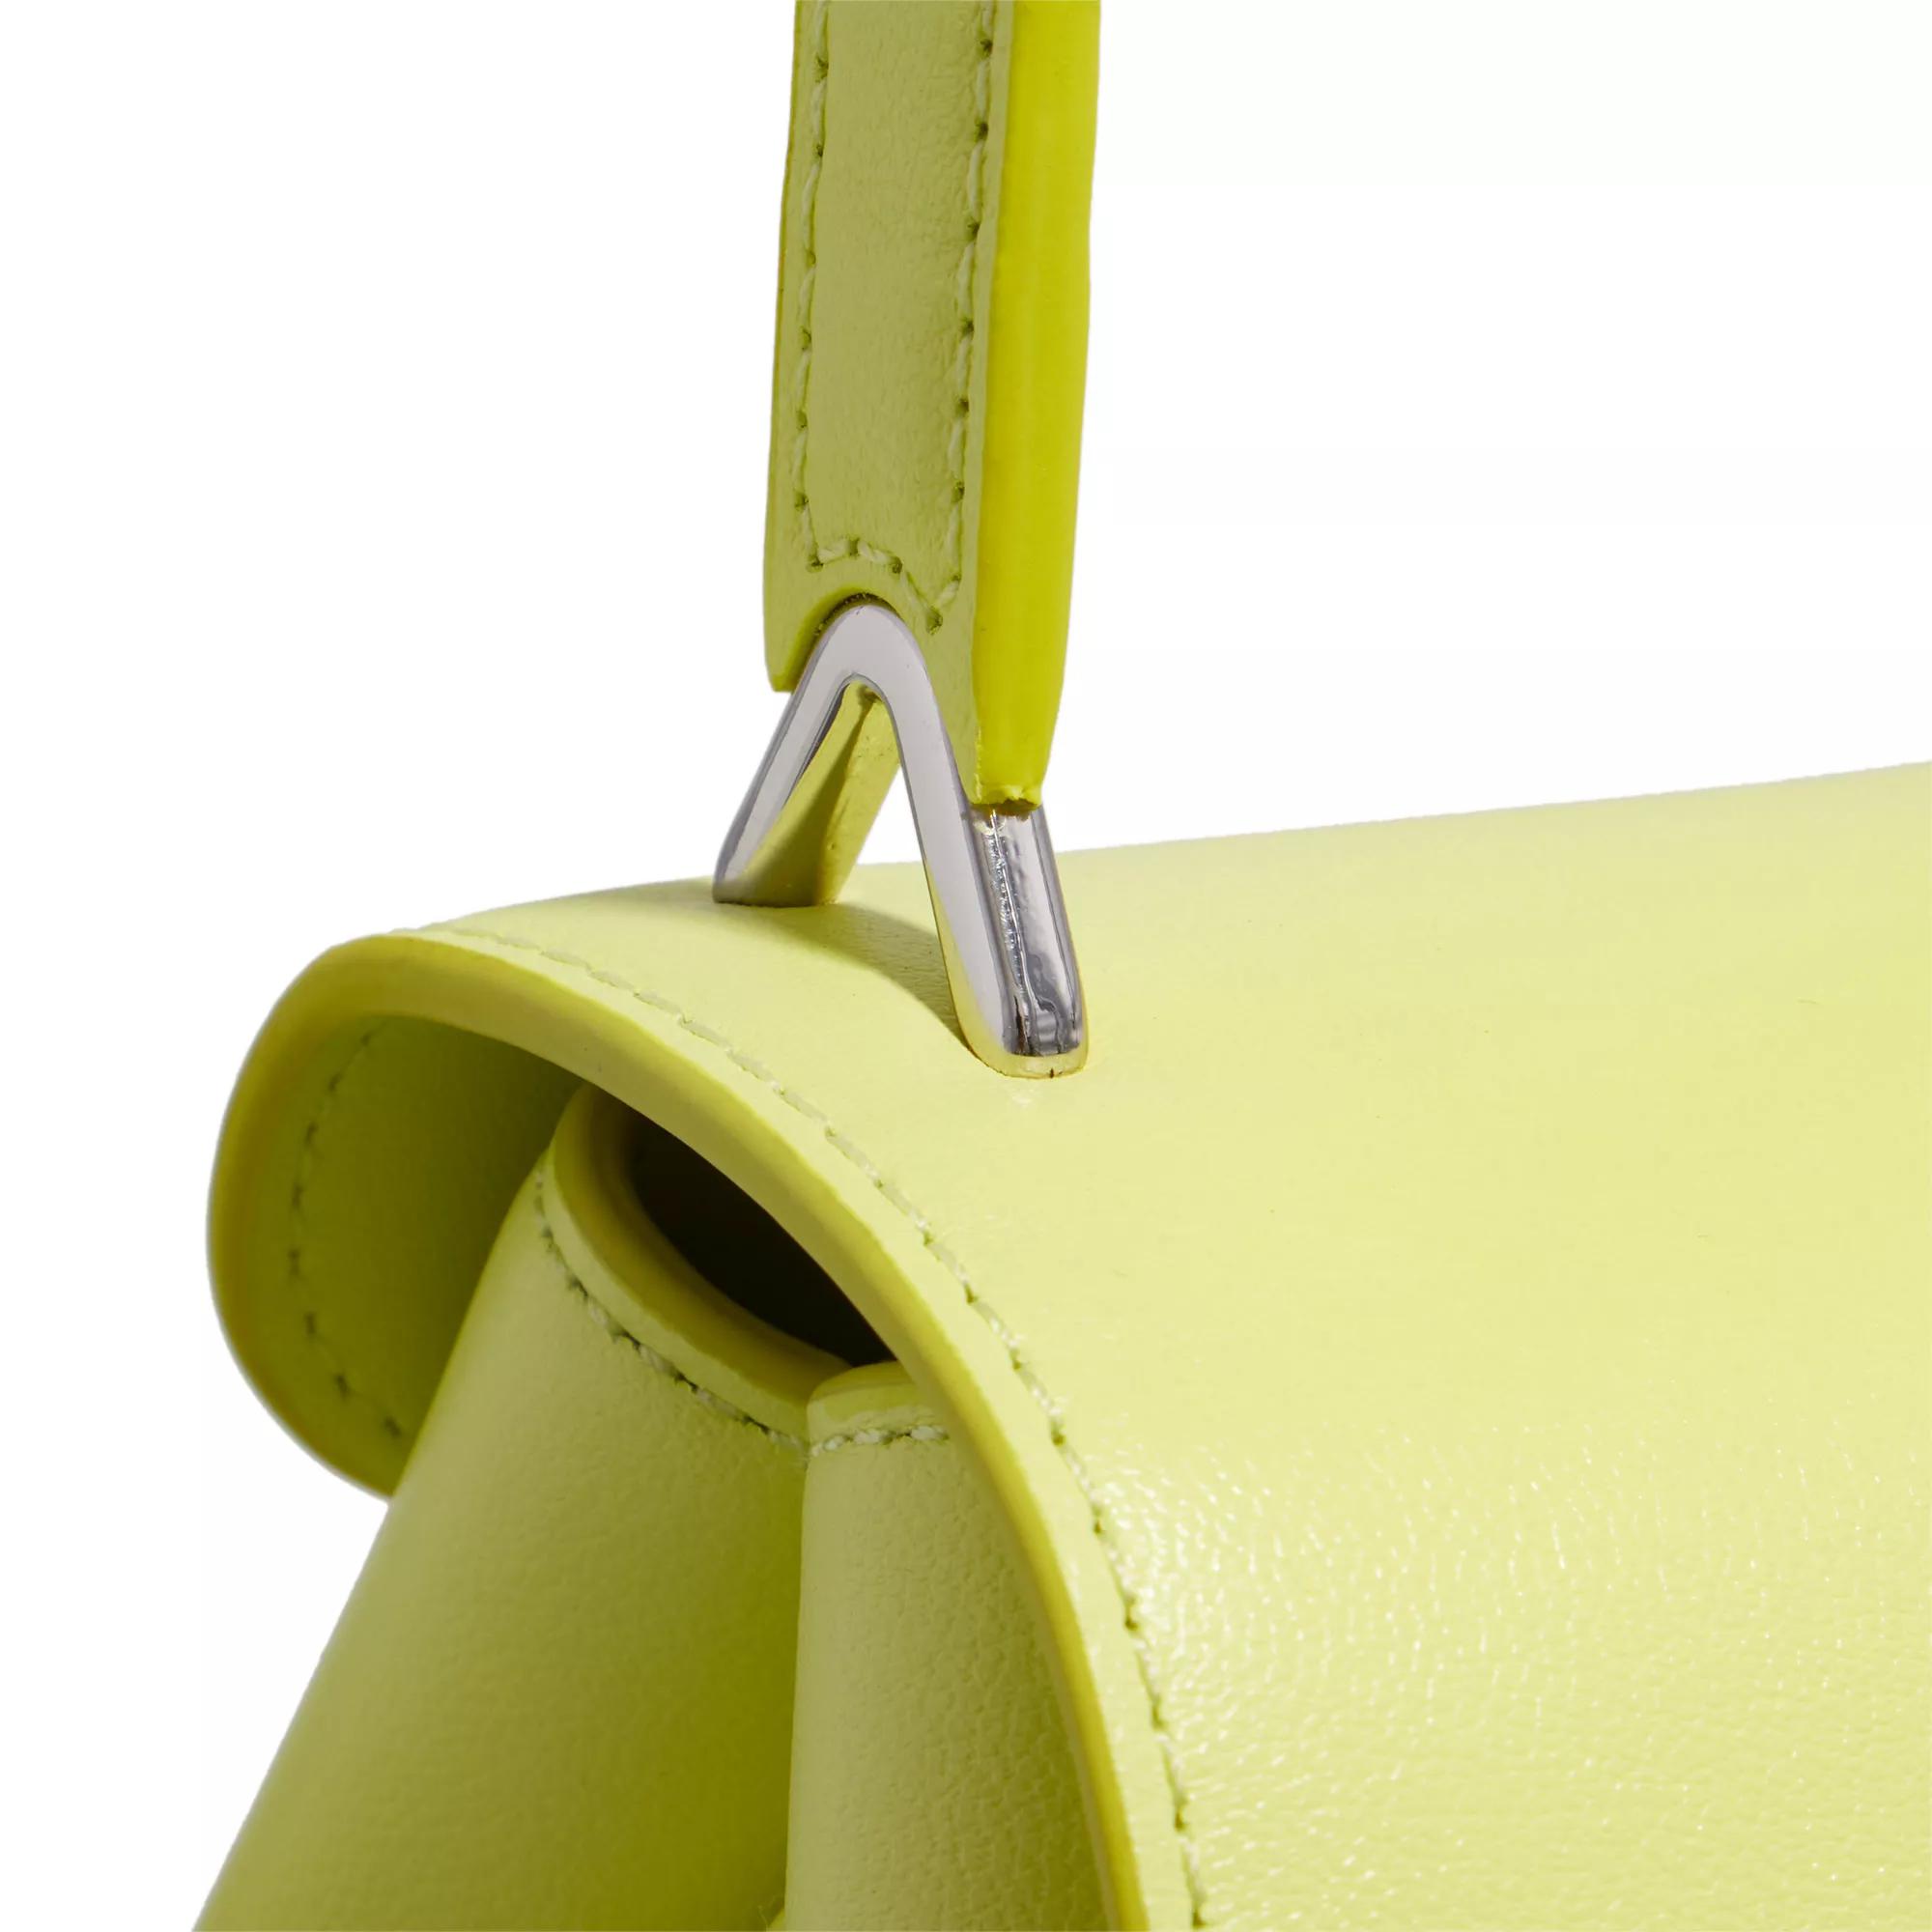 kate spade new york Pochettes Grace Smooth Leather in groen